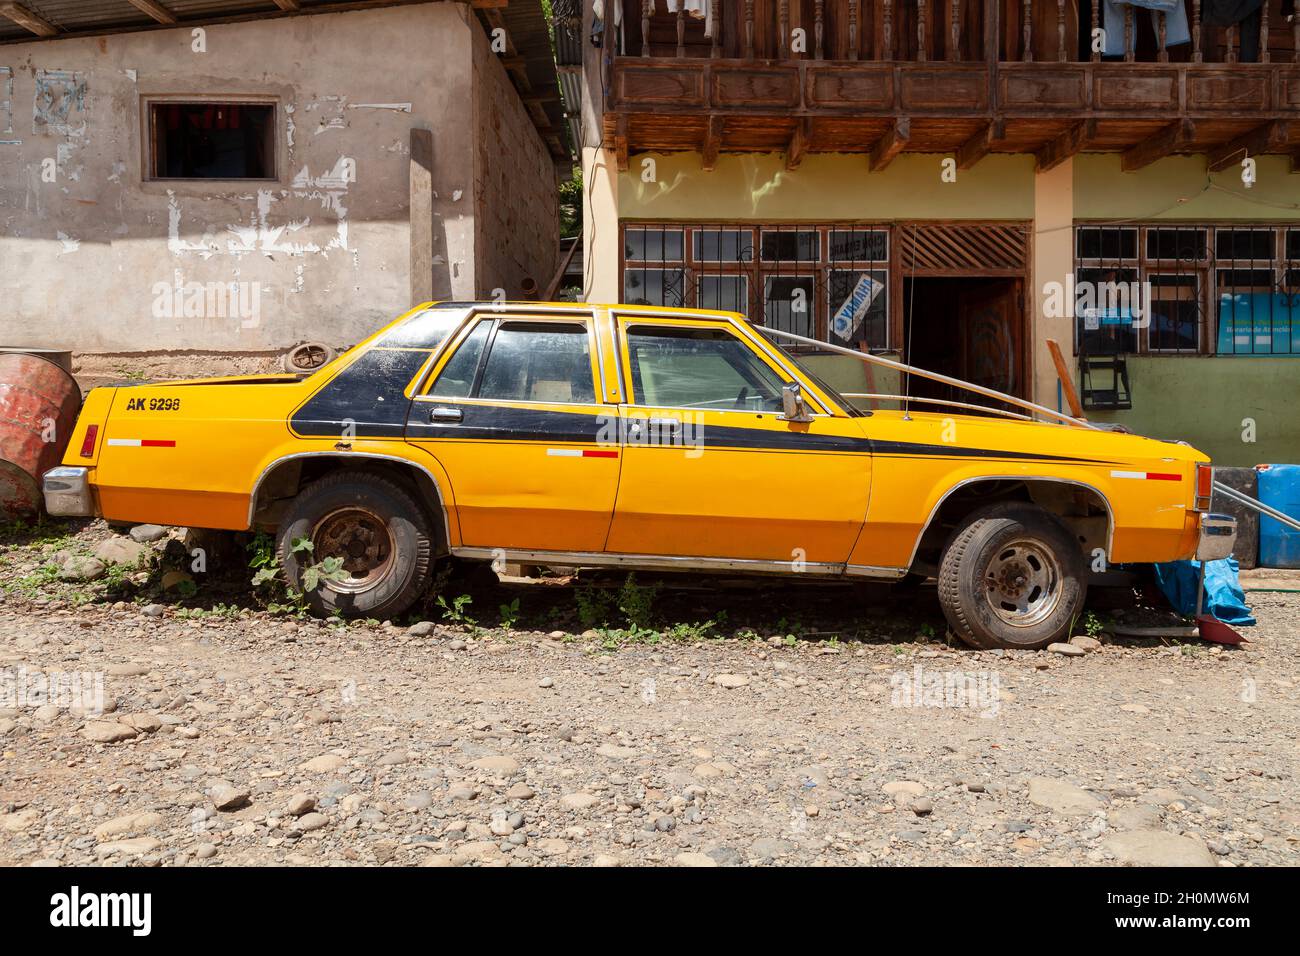 Pilcopata, Peru - April 10, 2014: An old and big yellow car, rests parked in the surroundings of the small town of Pilcopata Stock Photo